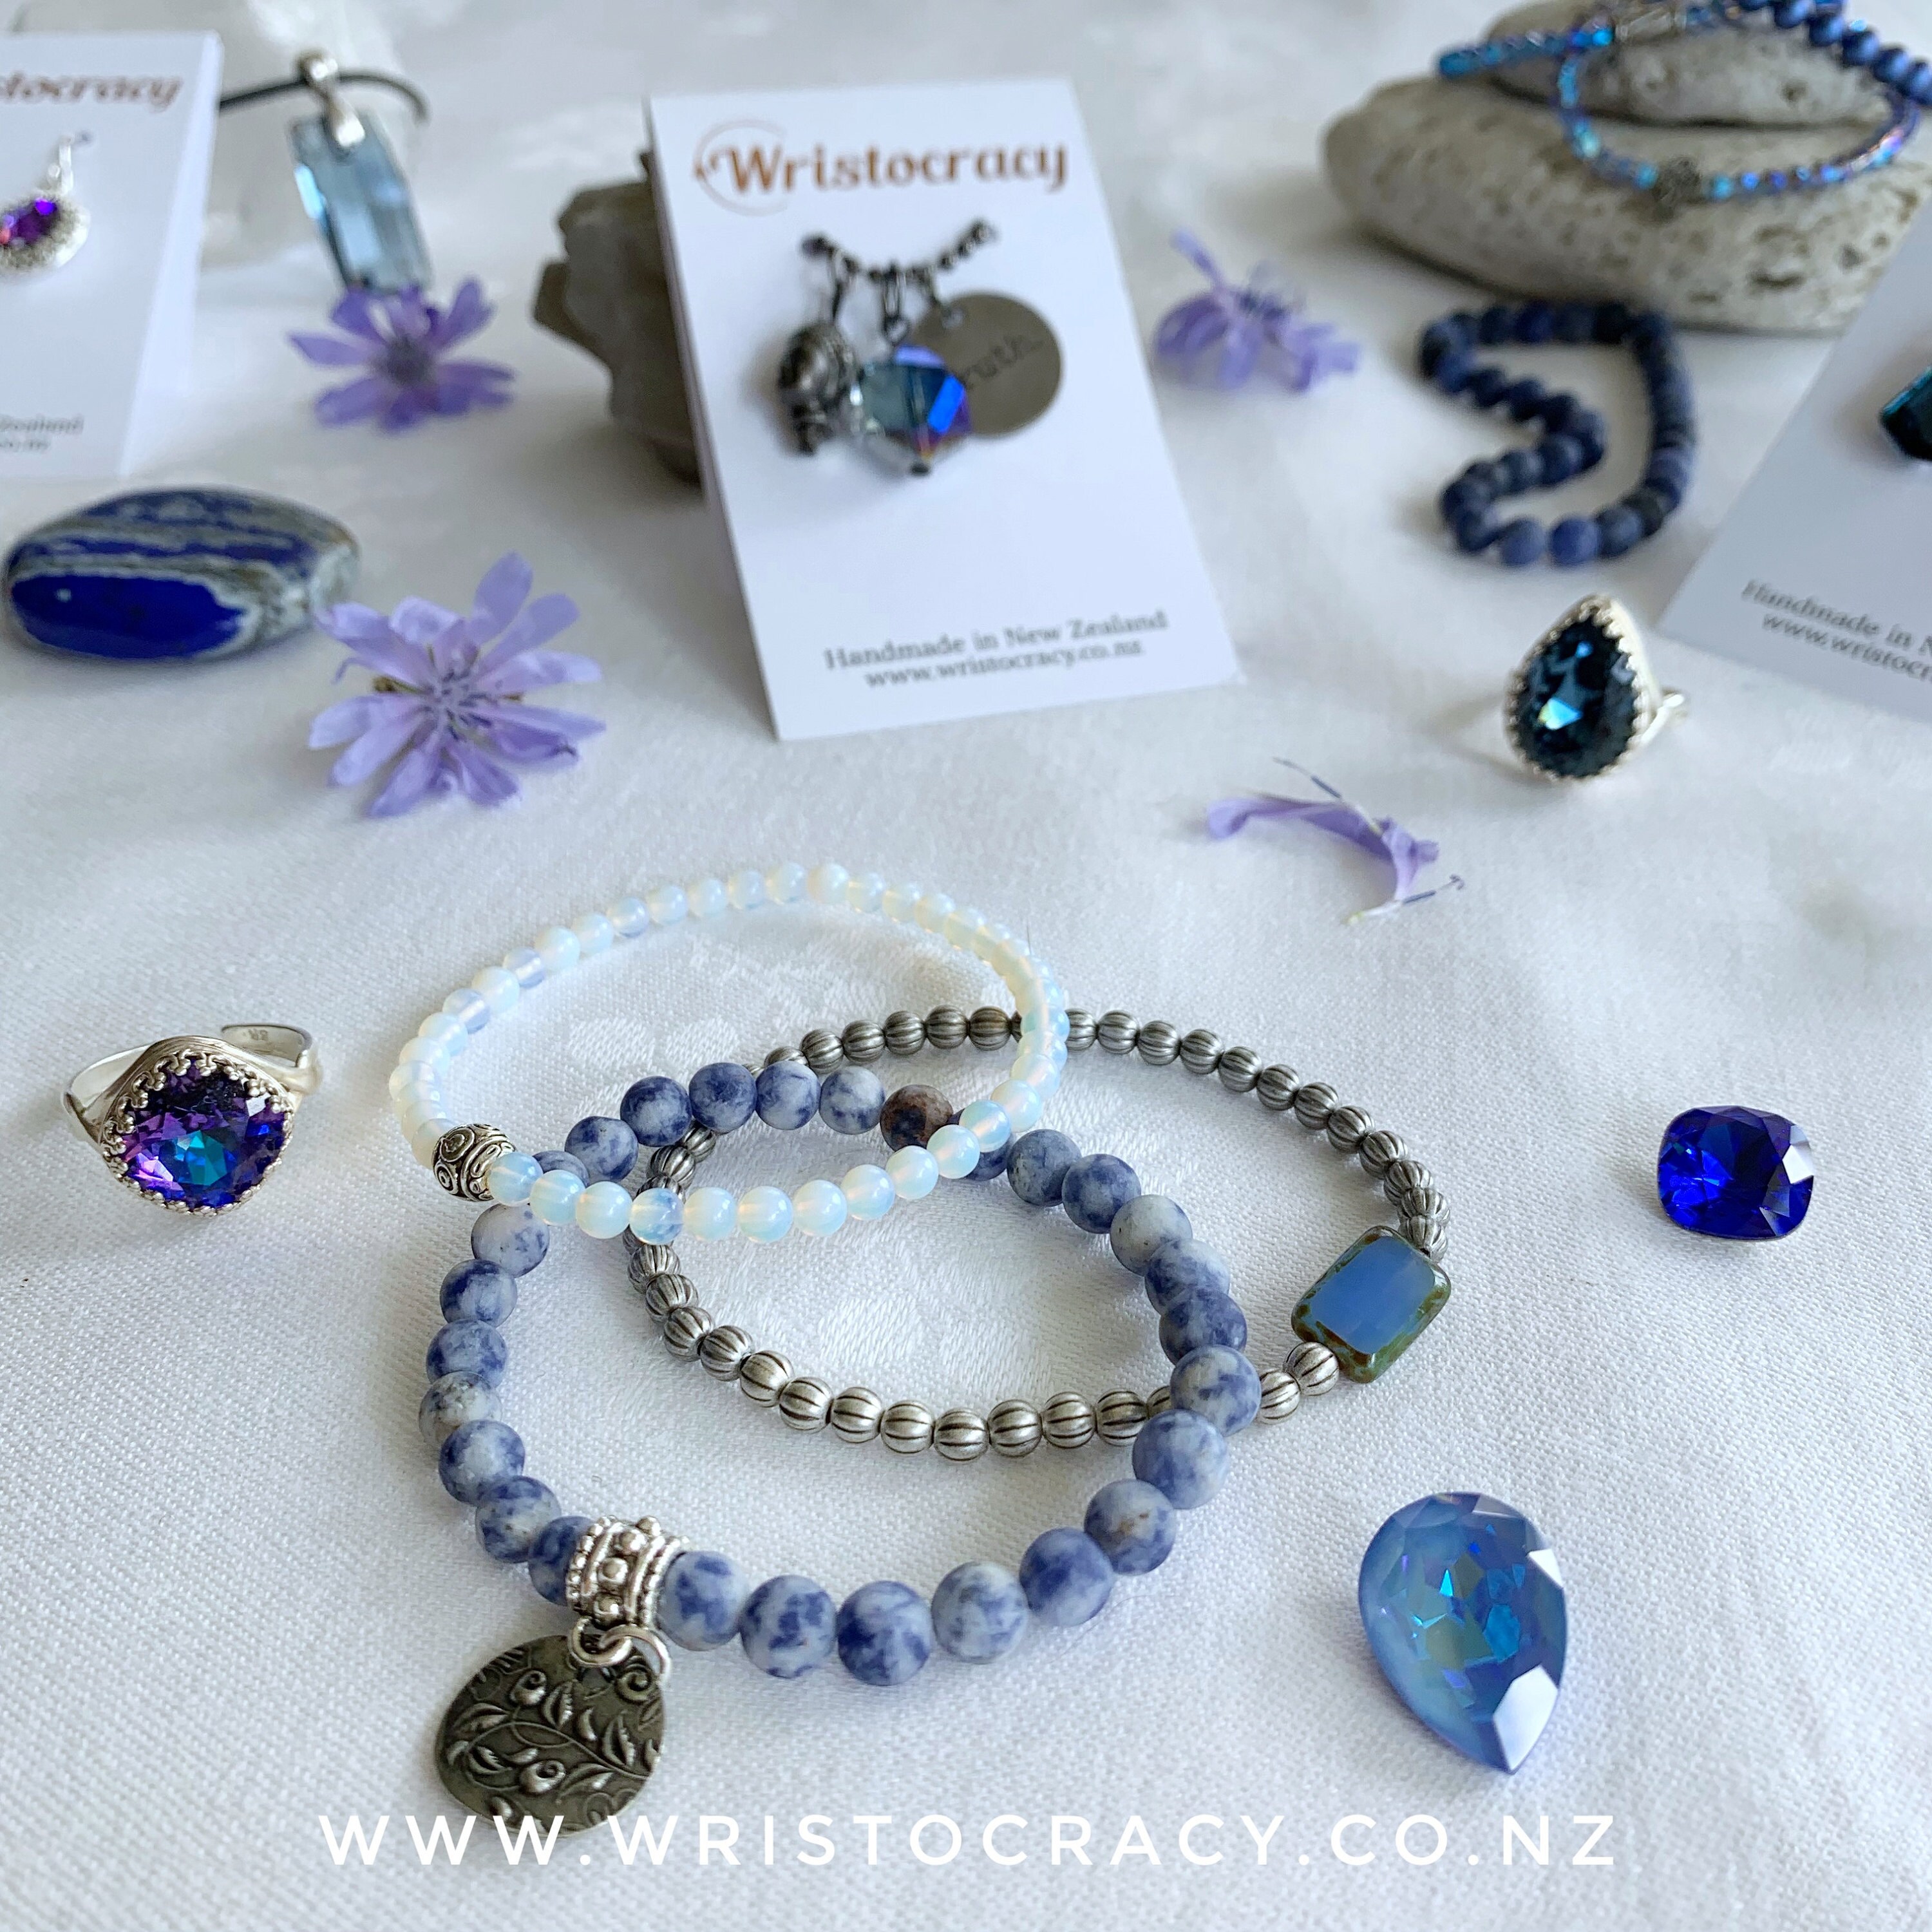 A little bit blue that @teatatu.nightmarkets has been cancelled this Friday ... but with Cyclone Oma expected to make landfall - I do understand why! So... my next market is now in just under two weeks time at @crafternoontea Albany Hall ... in the meantime you can order this Limited Edition Brazilian Sodalite set (I am running out) online ... Hope you’re all surviving the heat! PS check out my story for a little video if you like what you see including gorgeous soundtrack by the very talented @laurencollinssinger